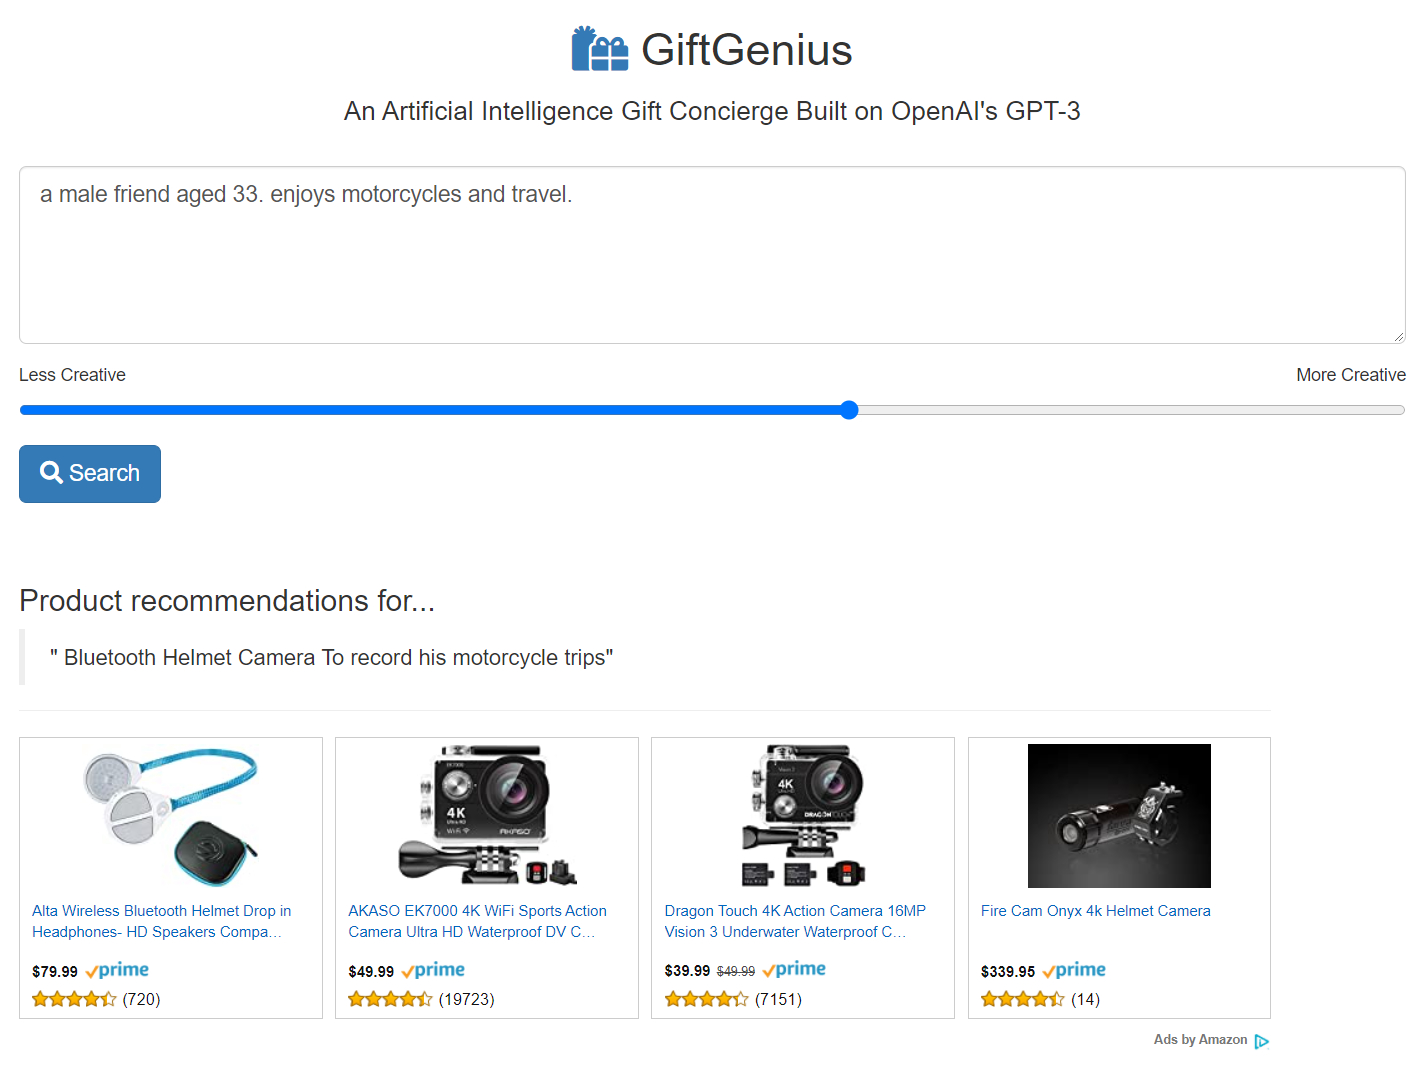 GiftGenius comes up with some surprisingly good gift recommendations